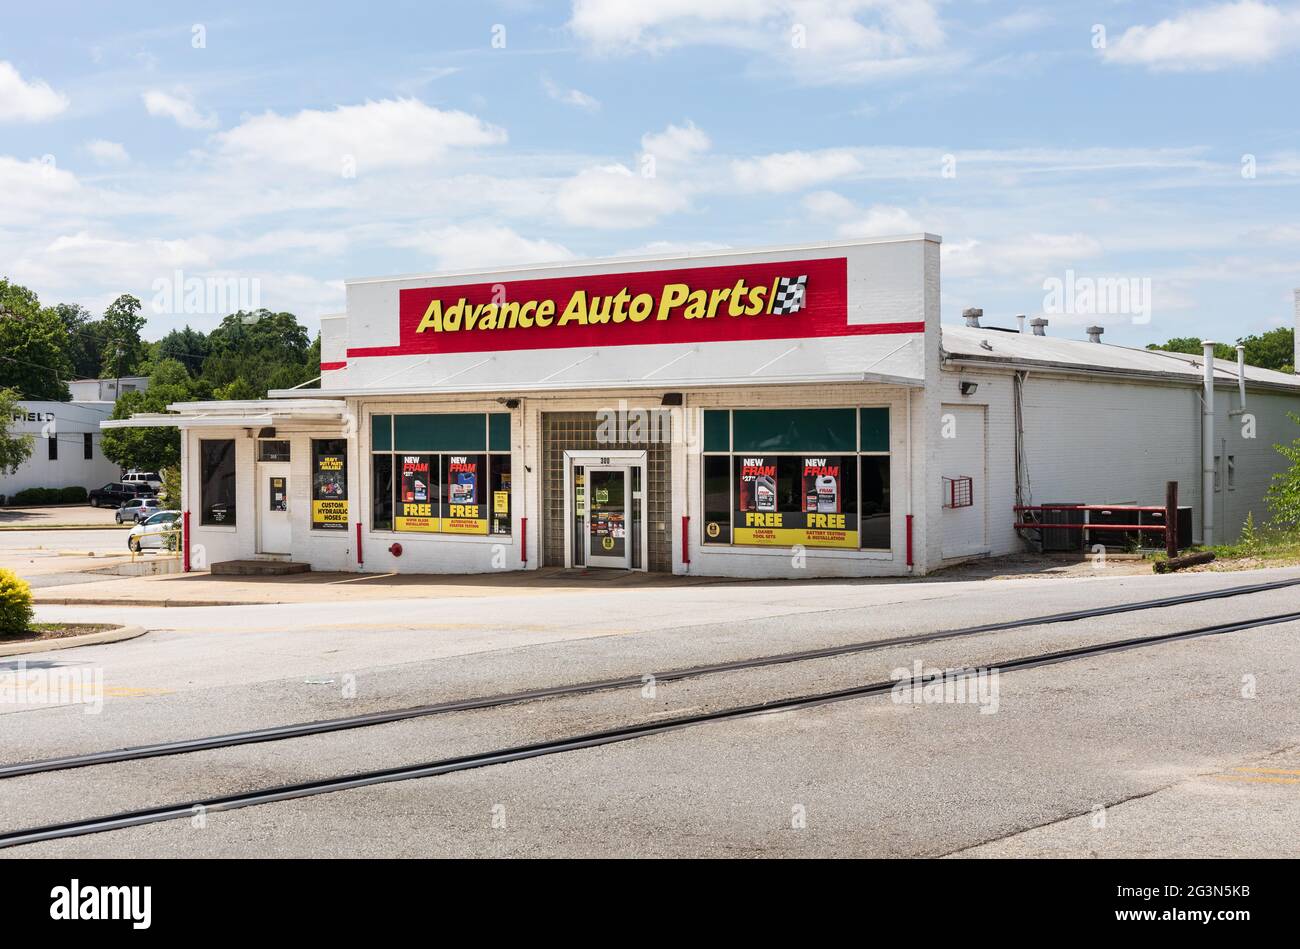 SPARTANBURG, SC, USA-13 JUNE 2021: Front view of an Advance Auto Parts store in an older building downtown, with large sign.  Horizontal image. Stock Photo